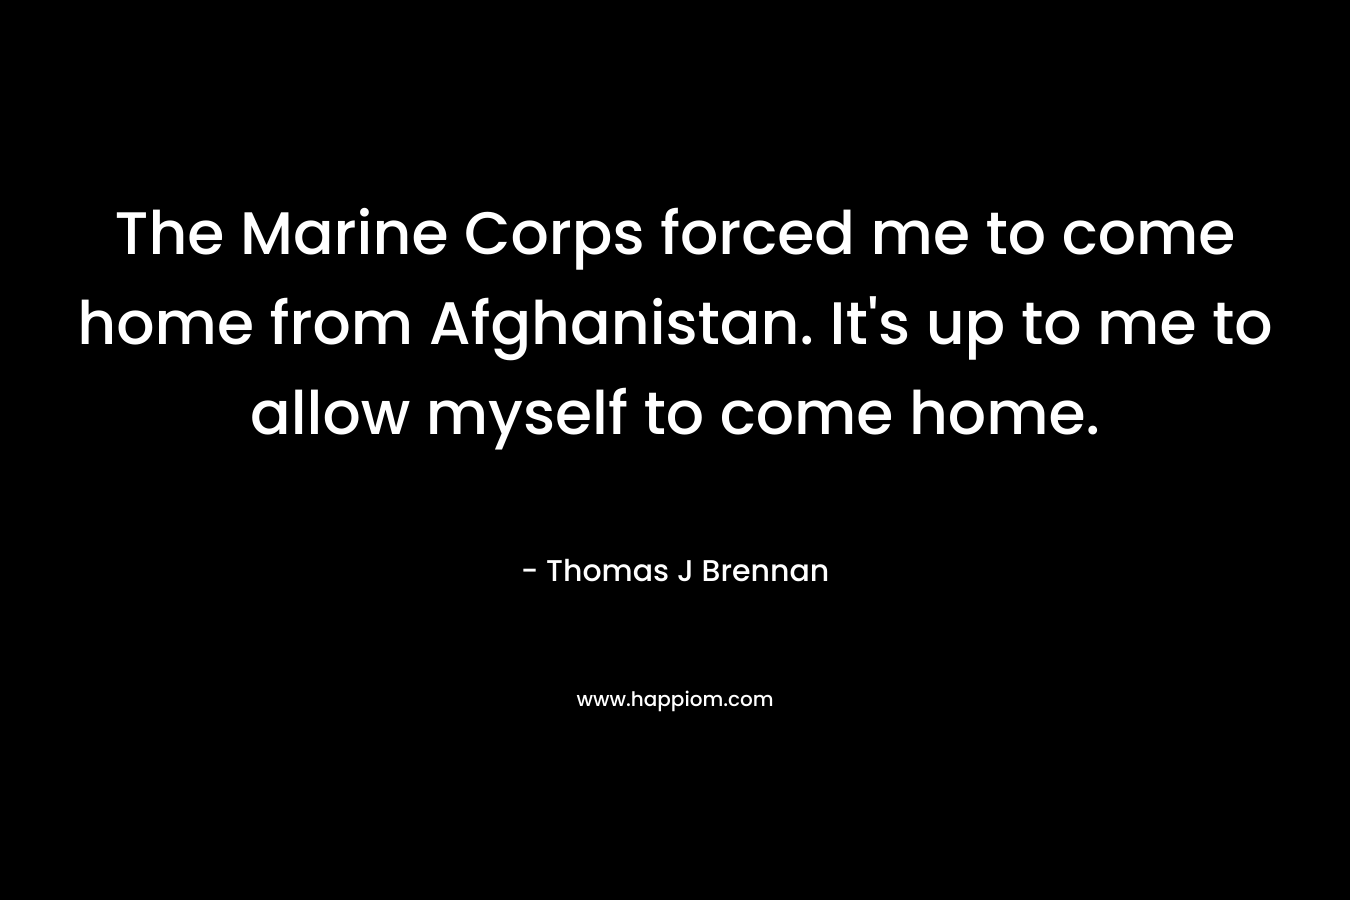 The Marine Corps forced me to come home from Afghanistan. It’s up to me to allow myself to come home. – Thomas J Brennan